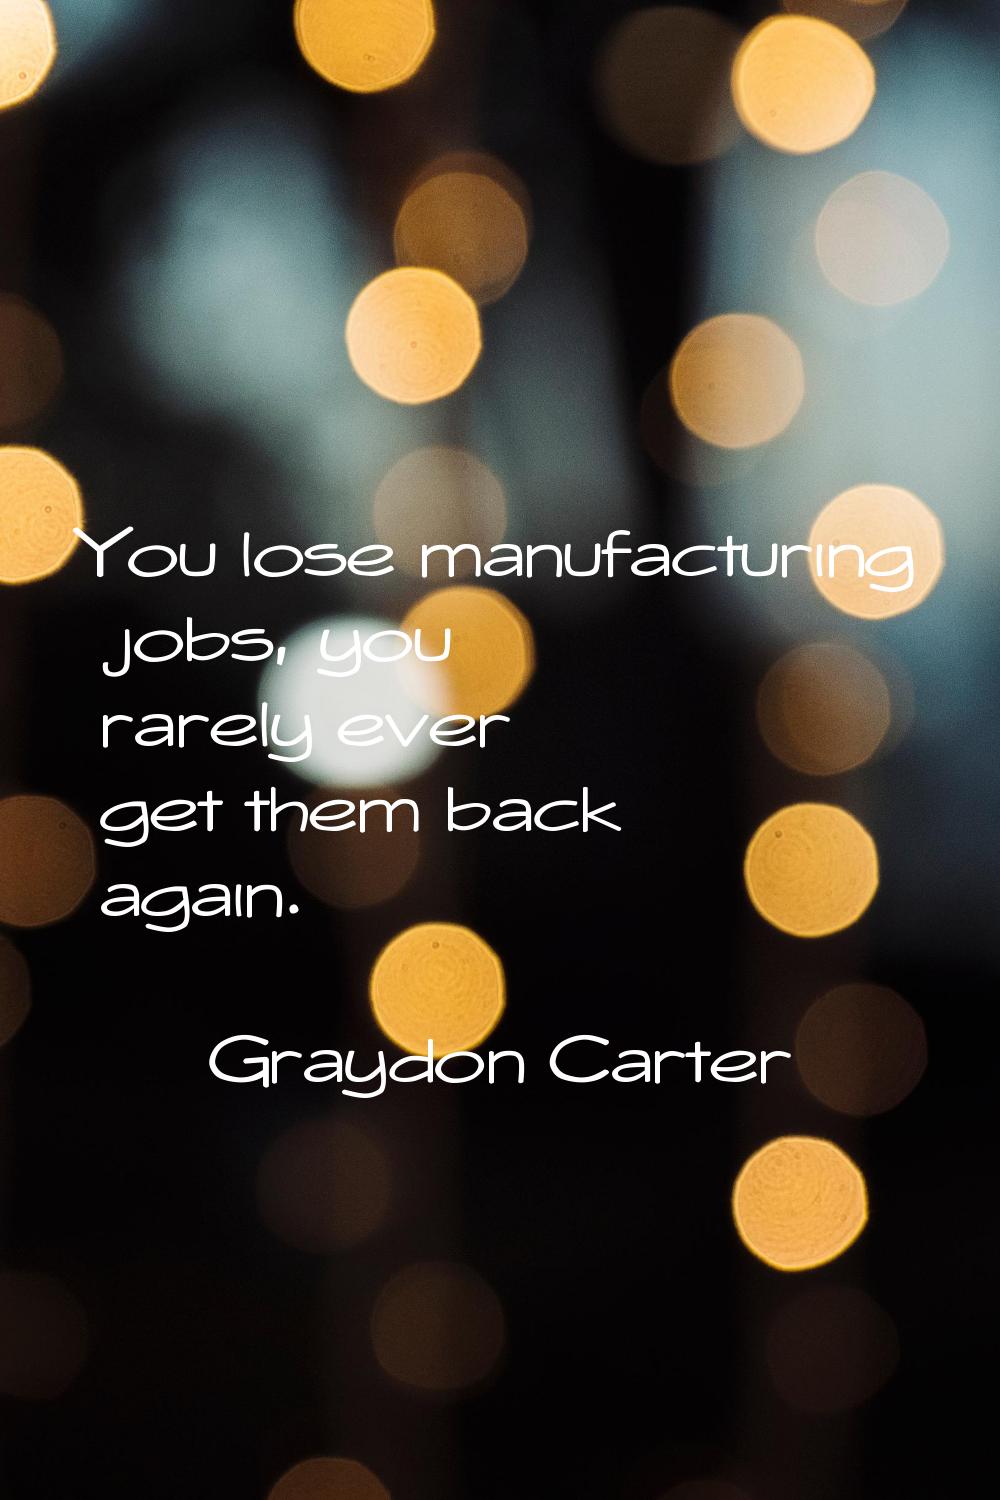 You lose manufacturing jobs, you rarely ever get them back again.